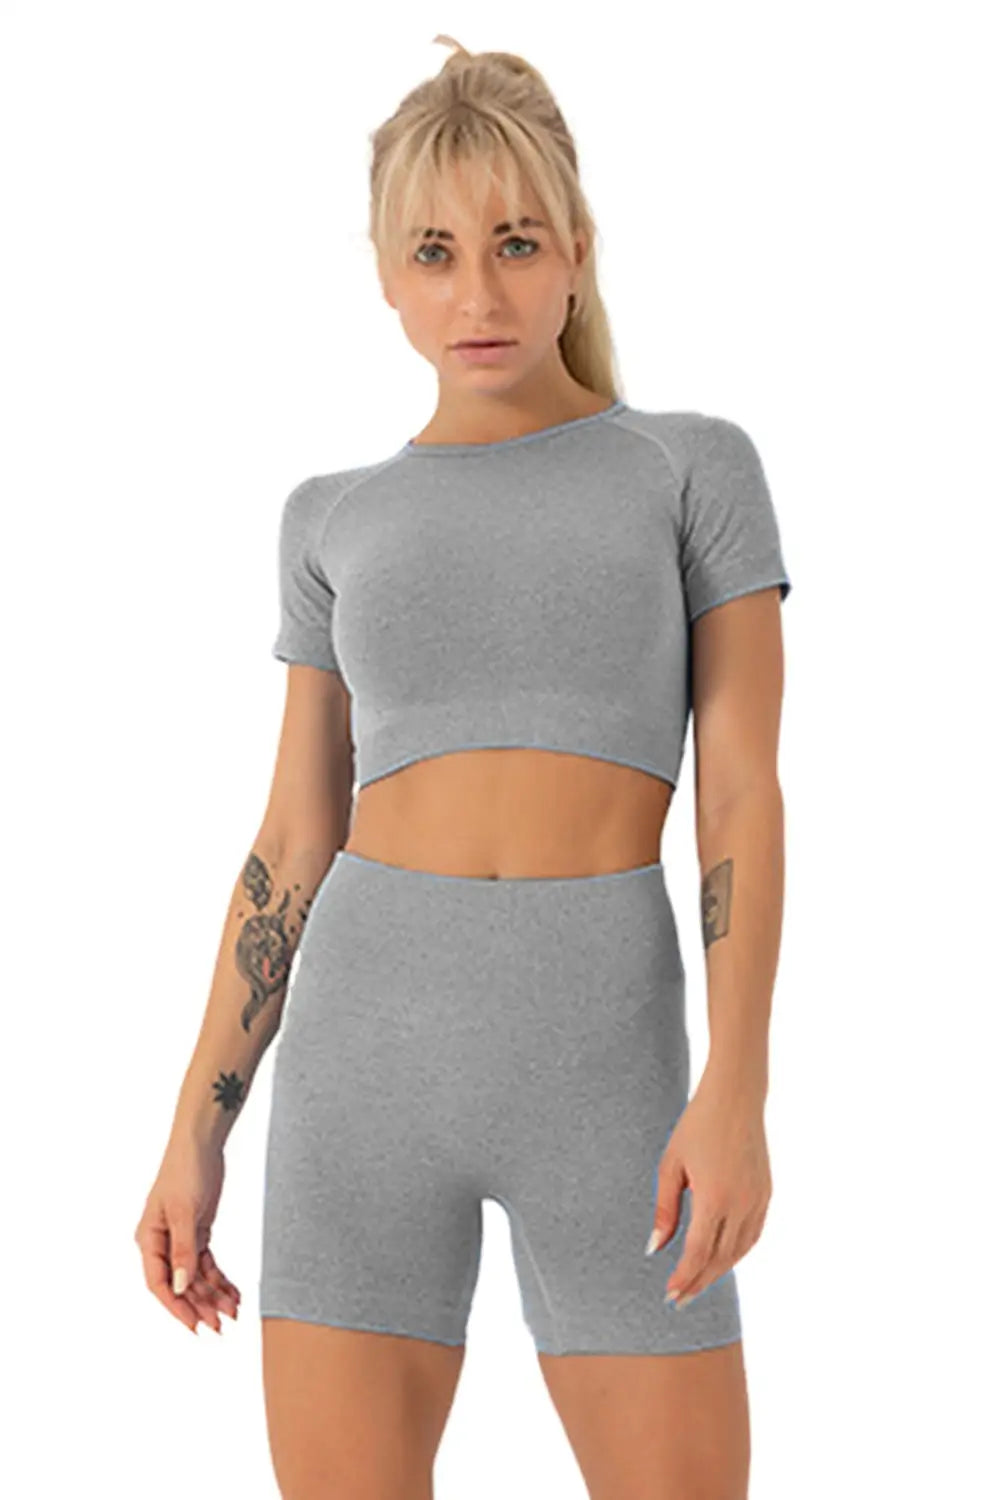 Gray Solid Crop Top and High Waist Shorts Yoga Set